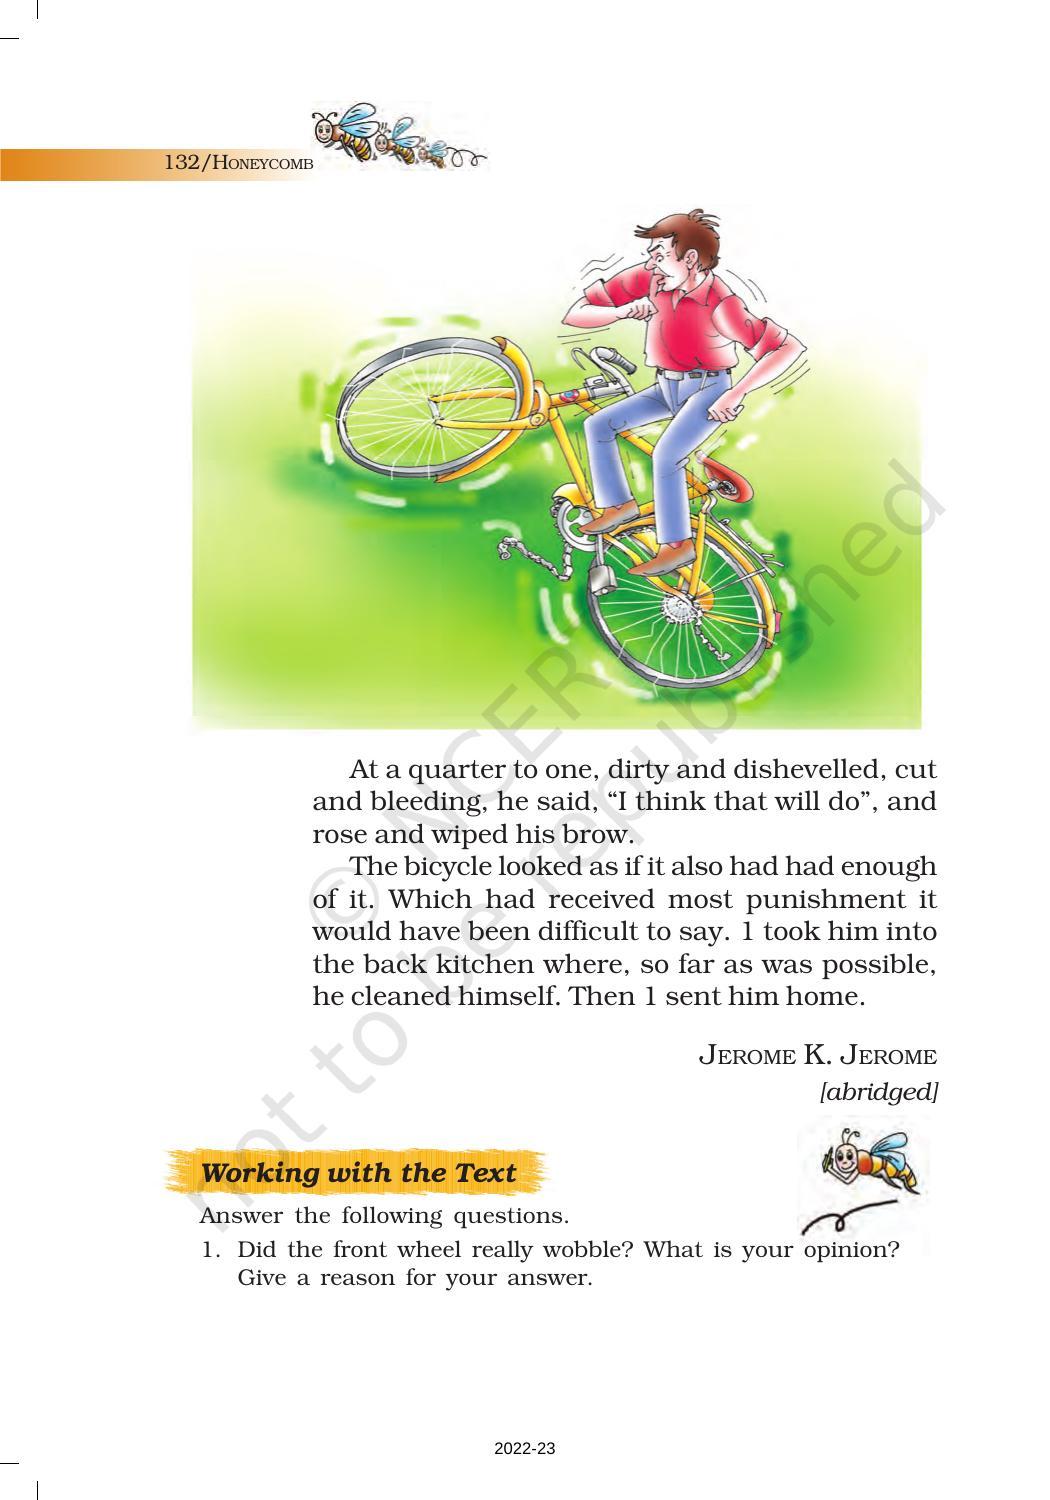 NCERT Book for Class 7 English (Honeycomb): Chapter 9-A Bicycle in Good Repair - Page 7